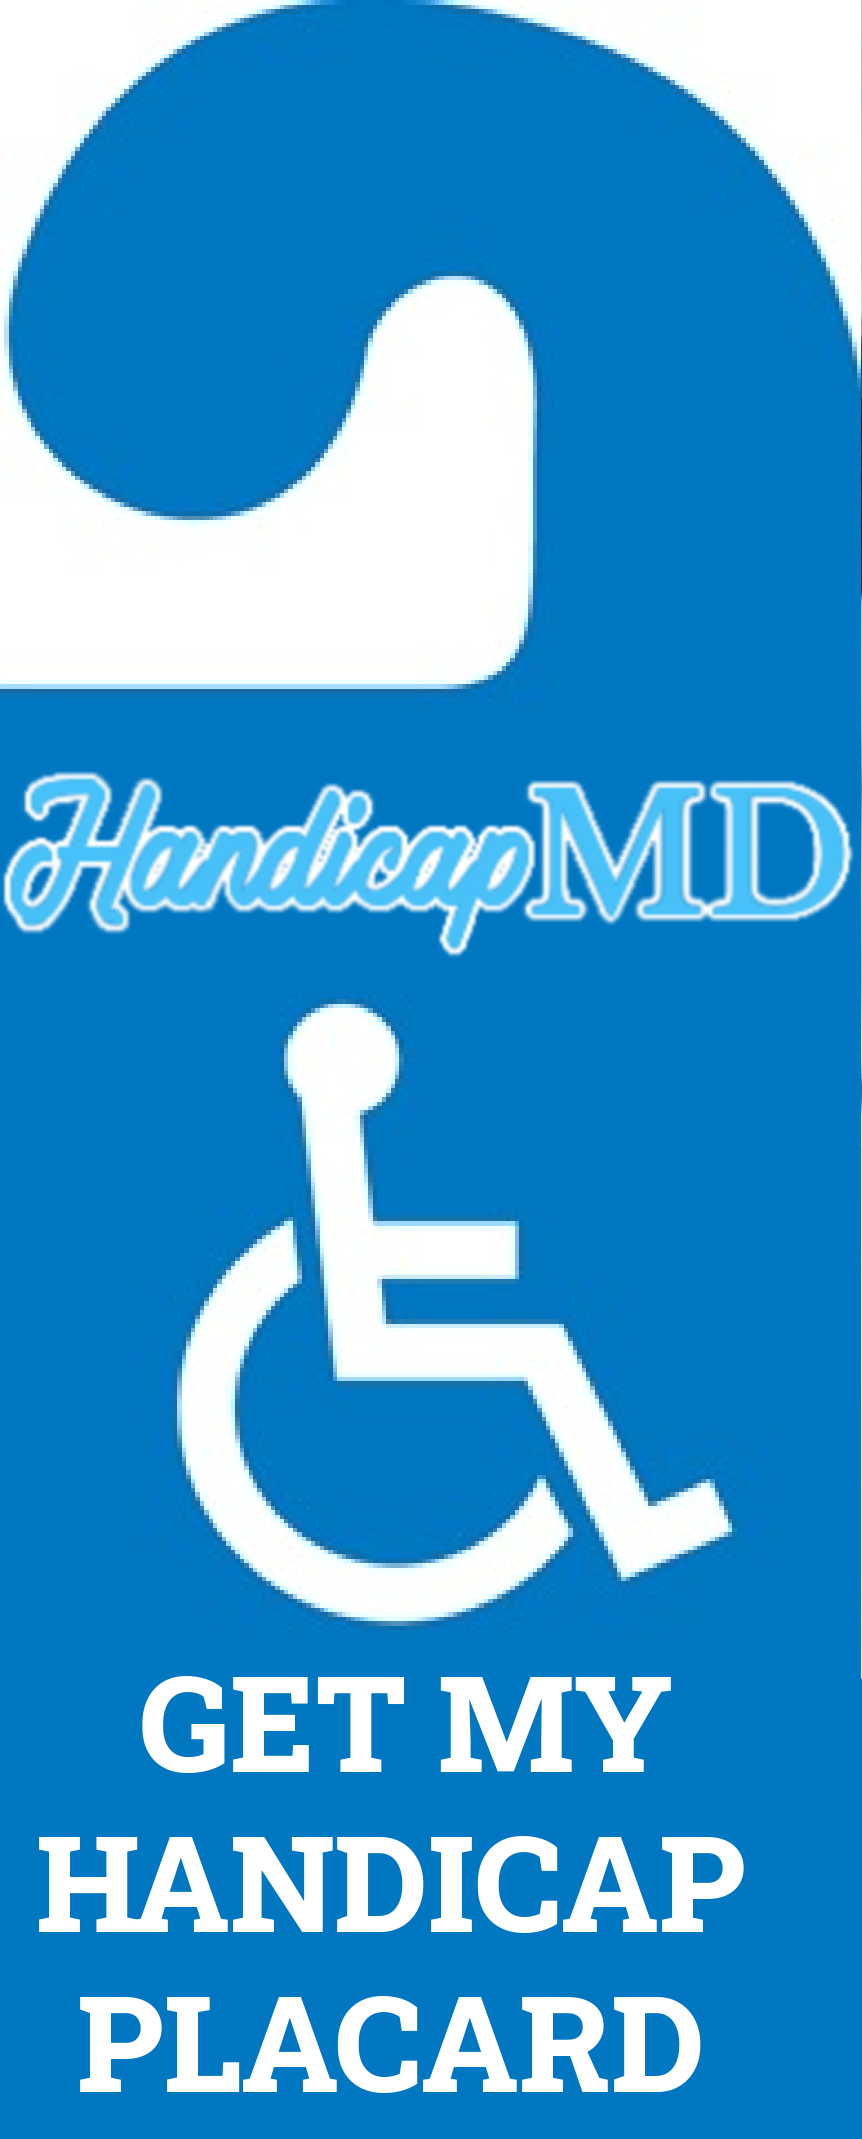 How To Get A Handicap Parking Placard Renewal in New Hampshire